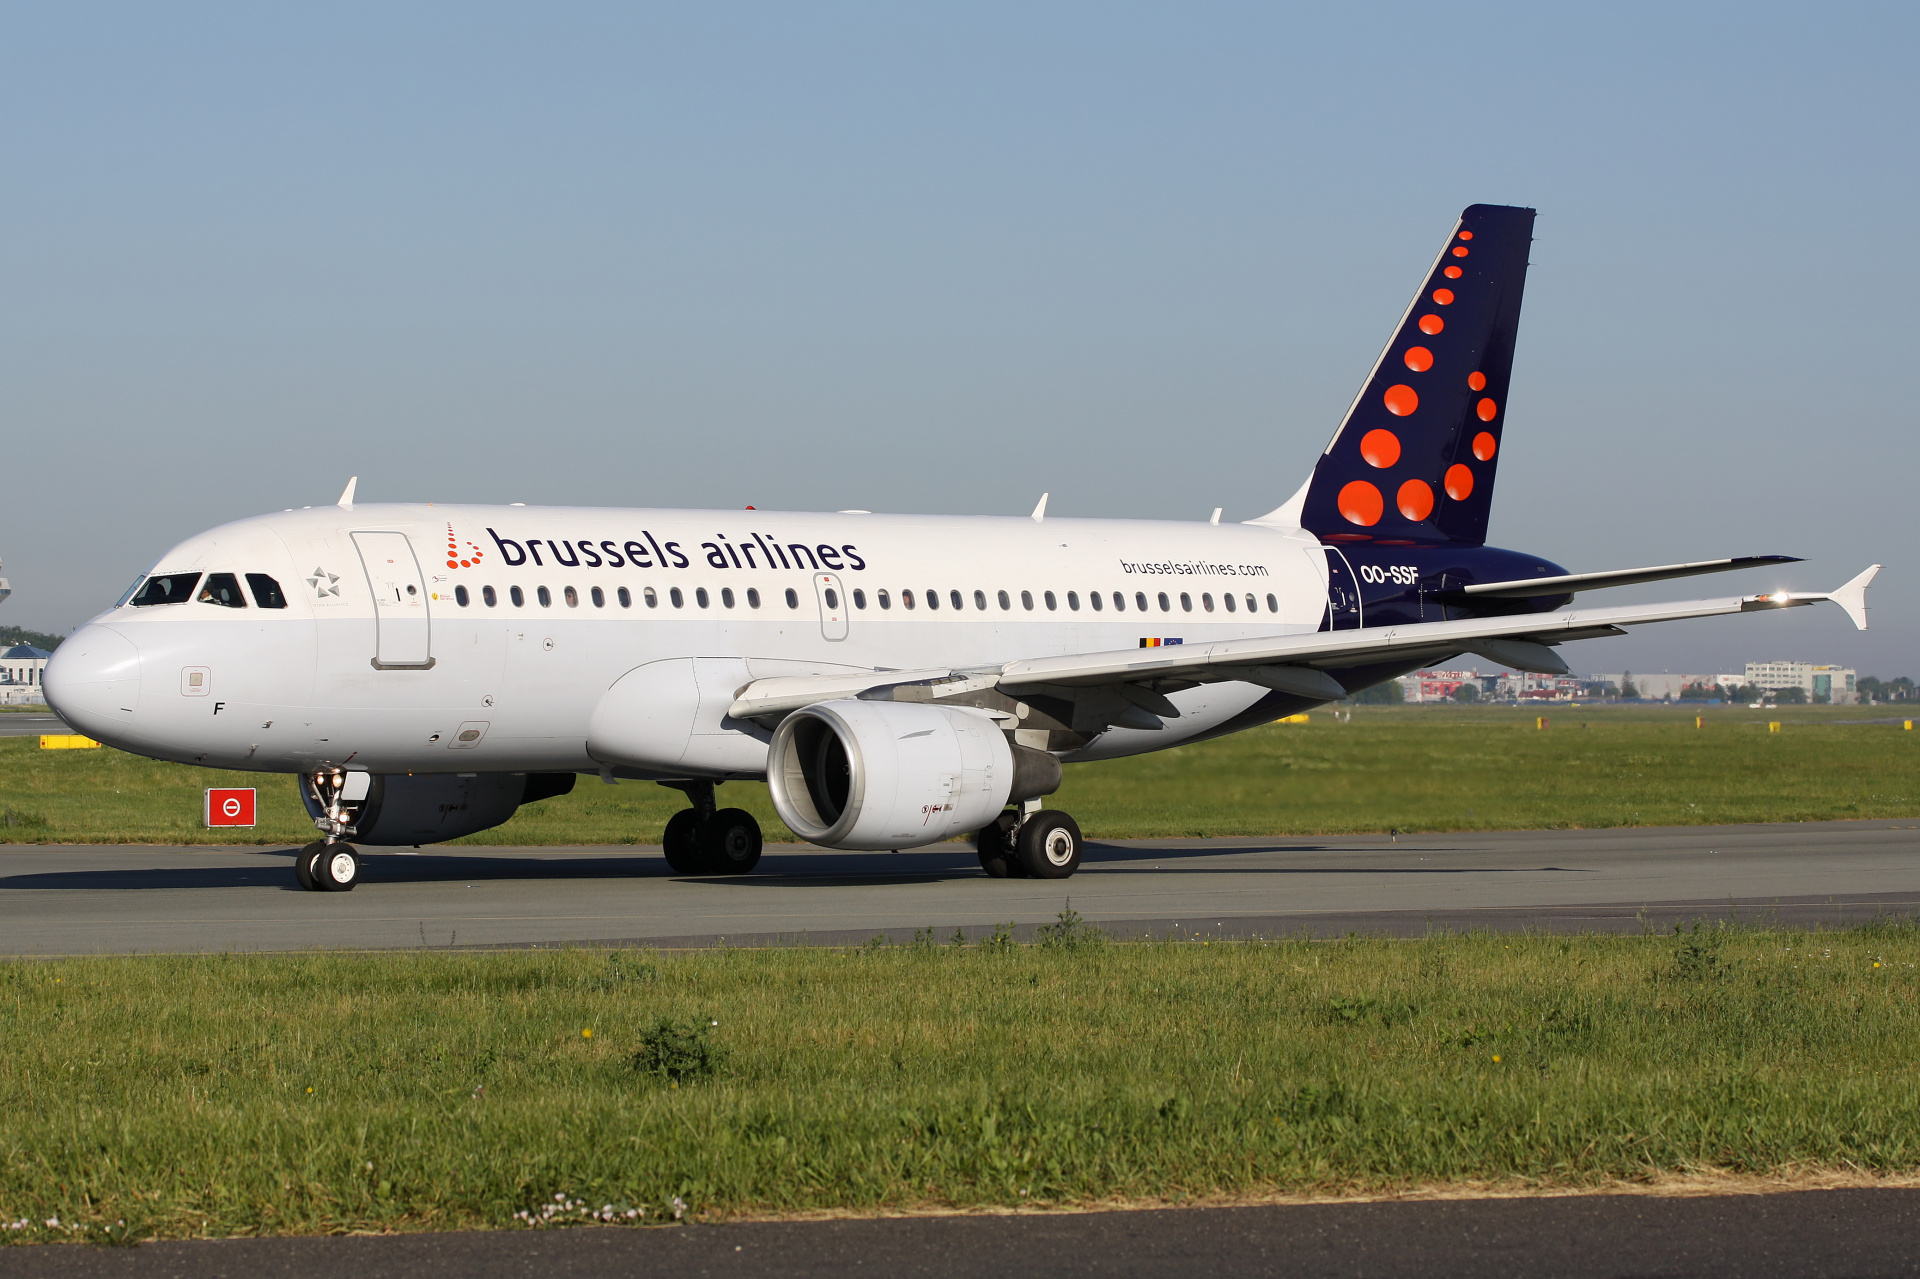 OO-SSF (Aircraft » EPWA Spotting » Airbus A319-100 » Brussels Airlines)